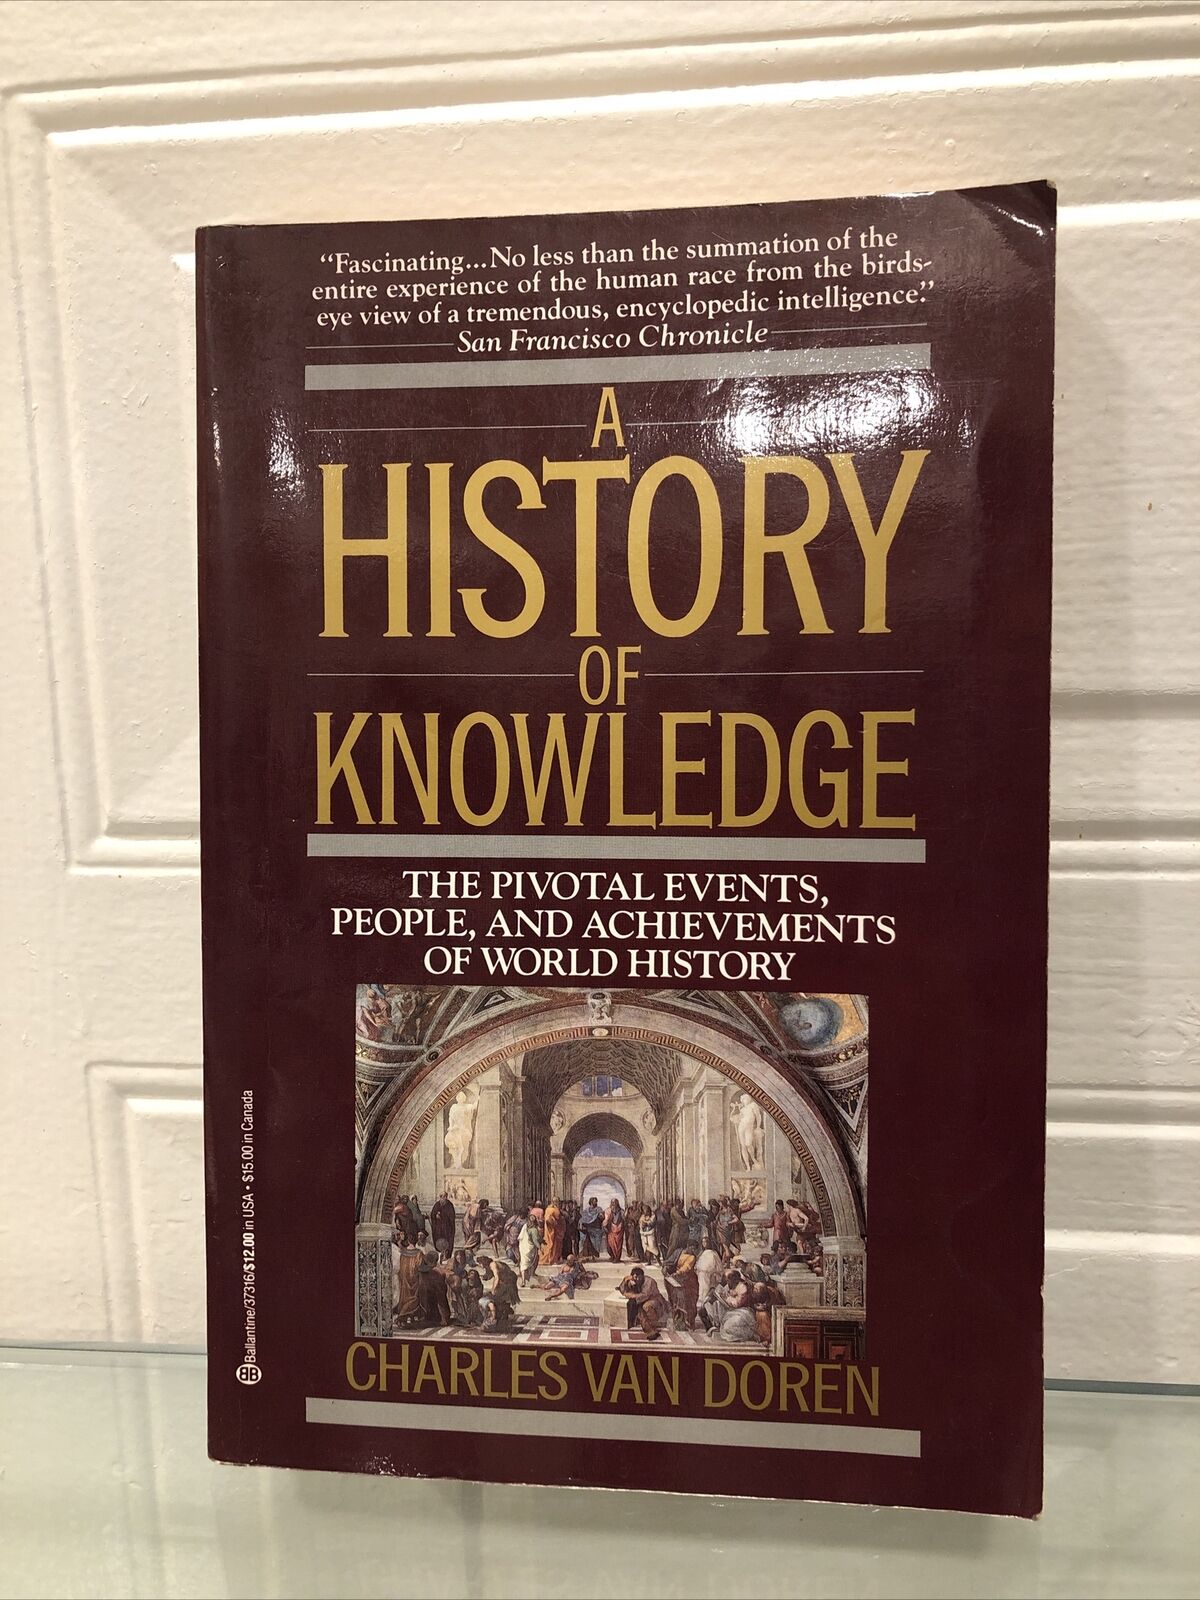 A History of Knowledge : Past, Present, and Future by Charles Van Doren...